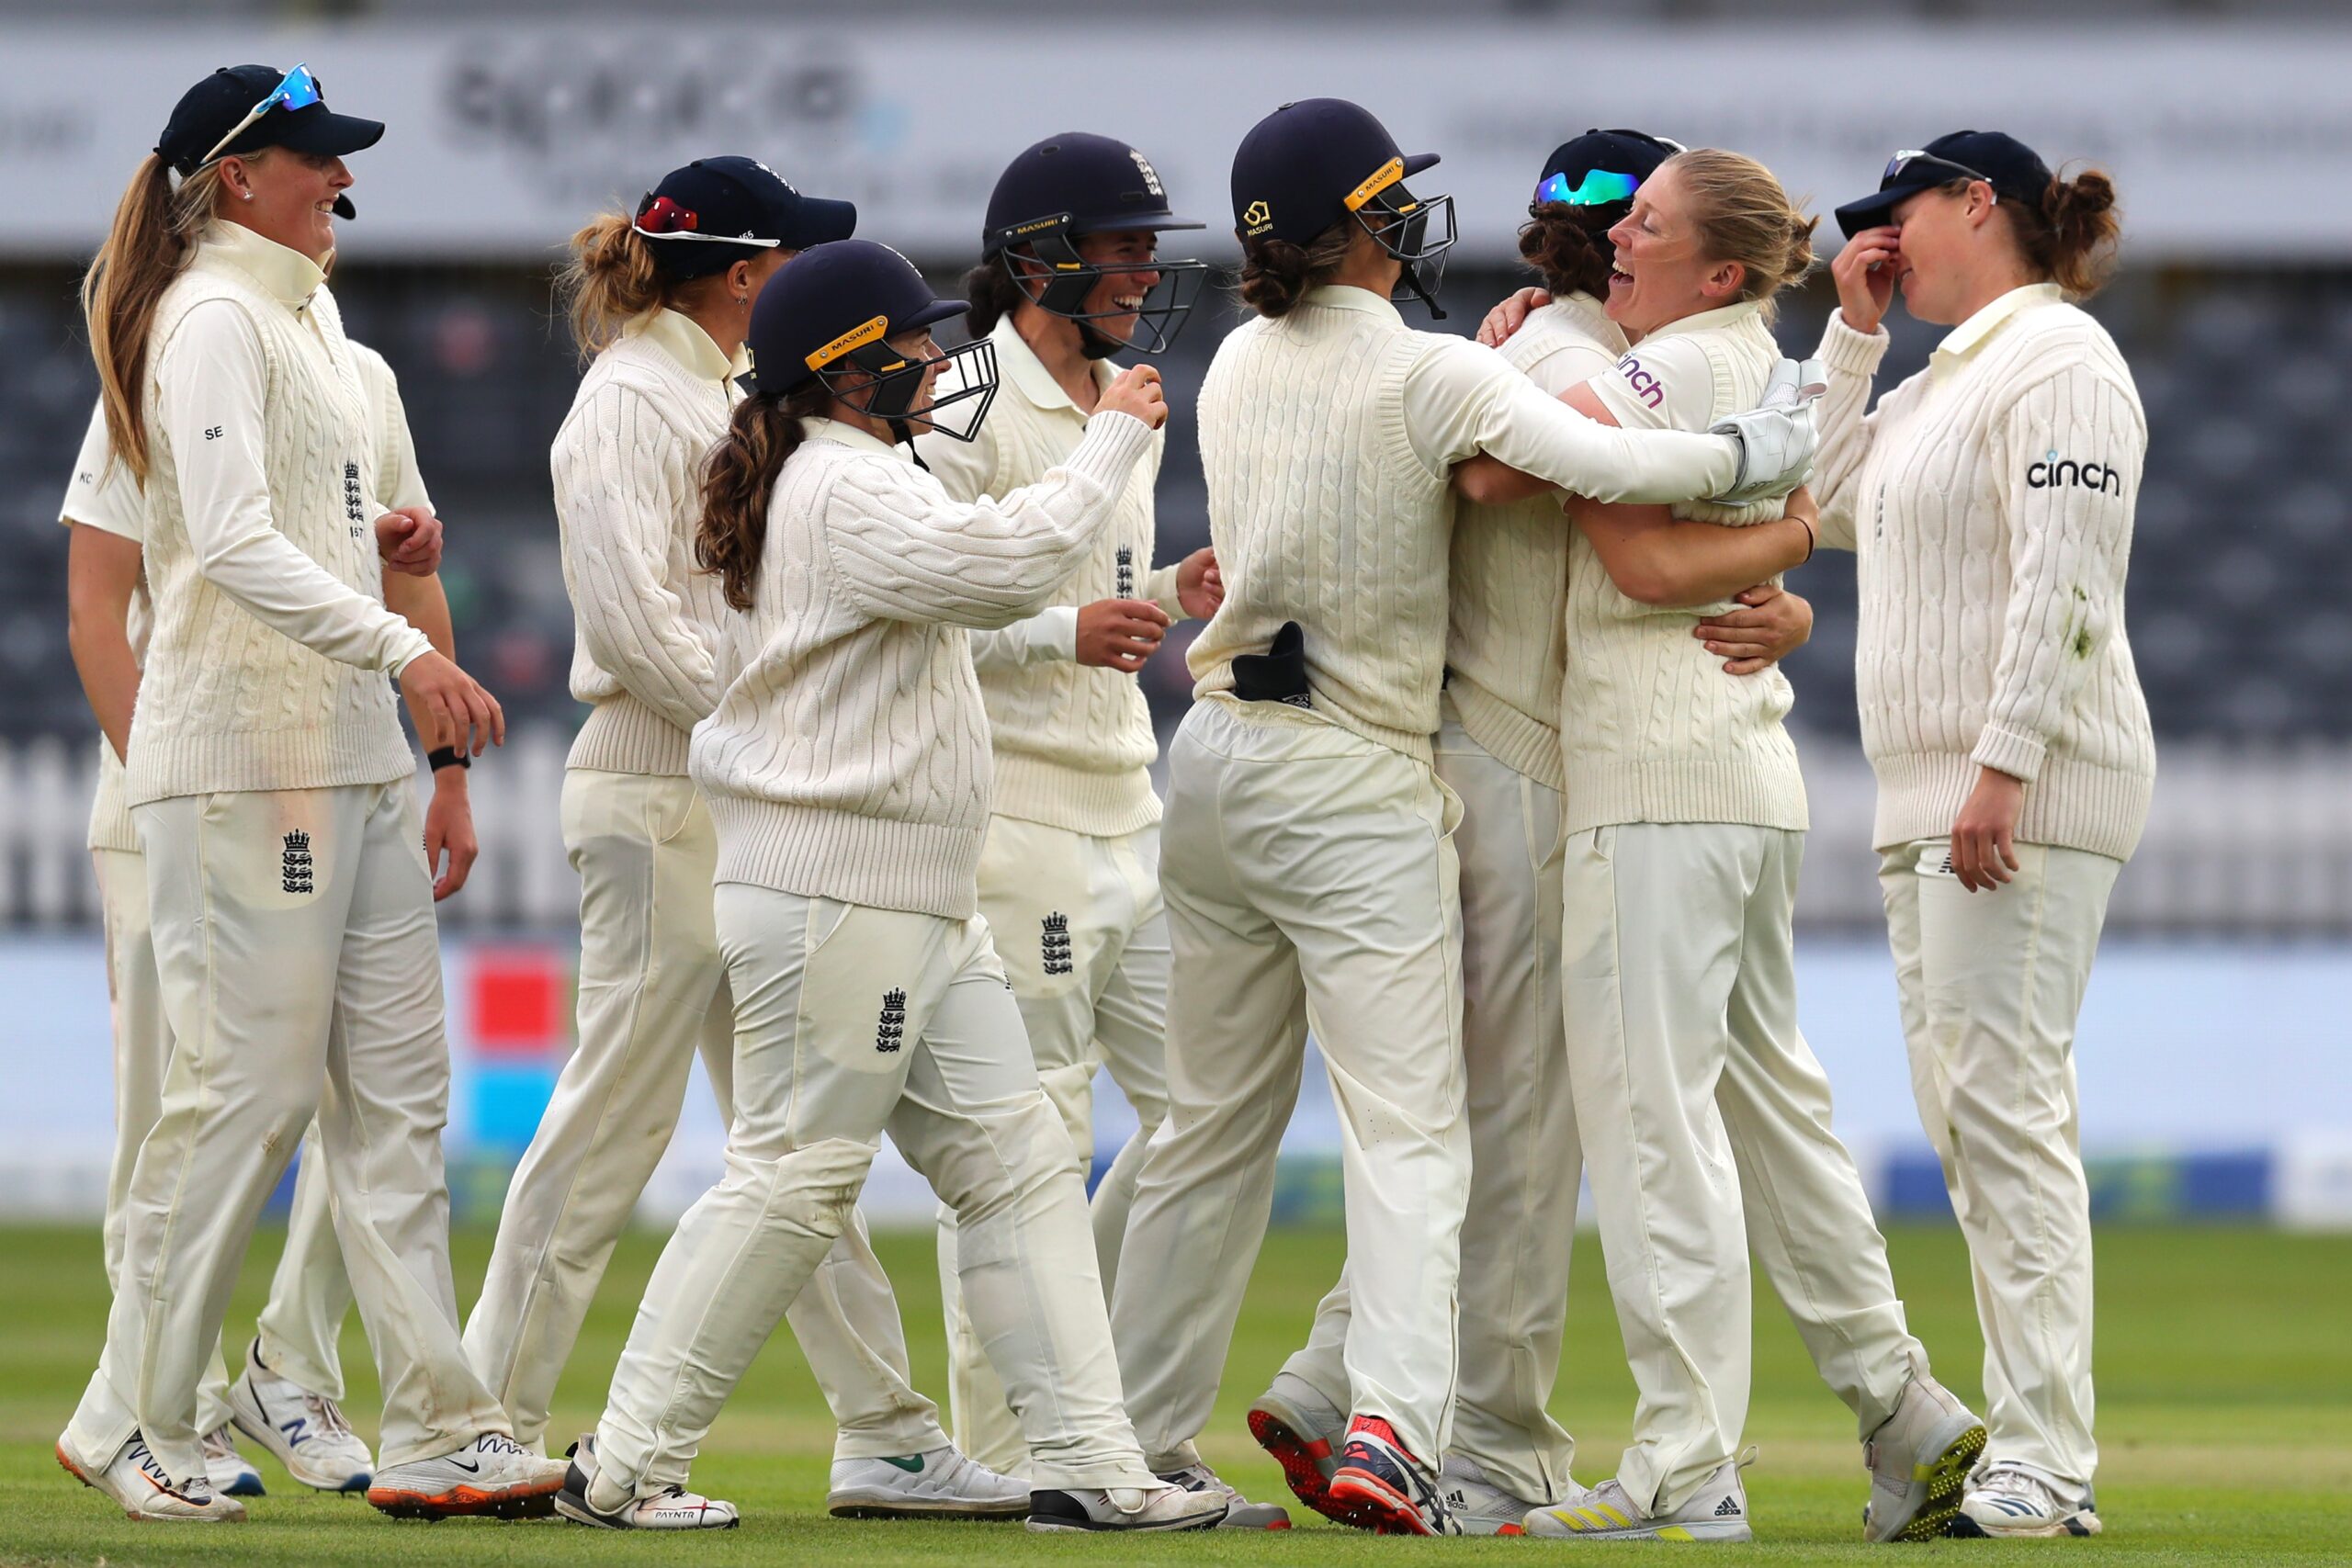 EN-W vs SA-W Dream11 Prediction, Fantasy Cricket Tips, Dream11 Team, Playing XI, Pitch Report, Injury Update- South Africa Women Tour of England, One-off Test